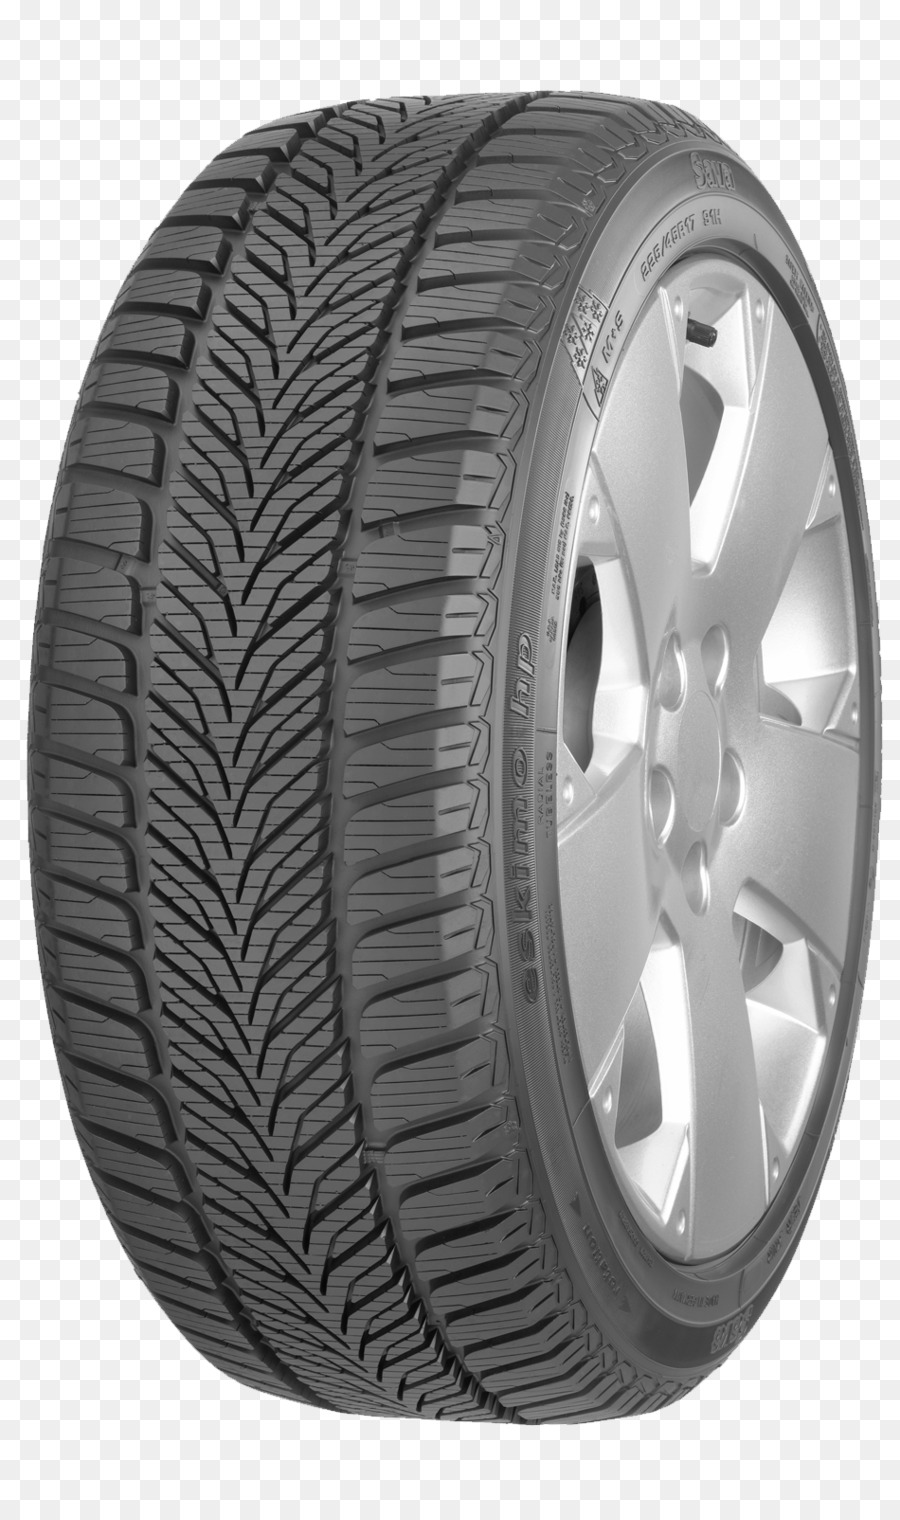 Auto Goodyear Tire and Rubber Company Neve pneumatici Goodyear Dunlop Pneumatici Sava - pneumatici